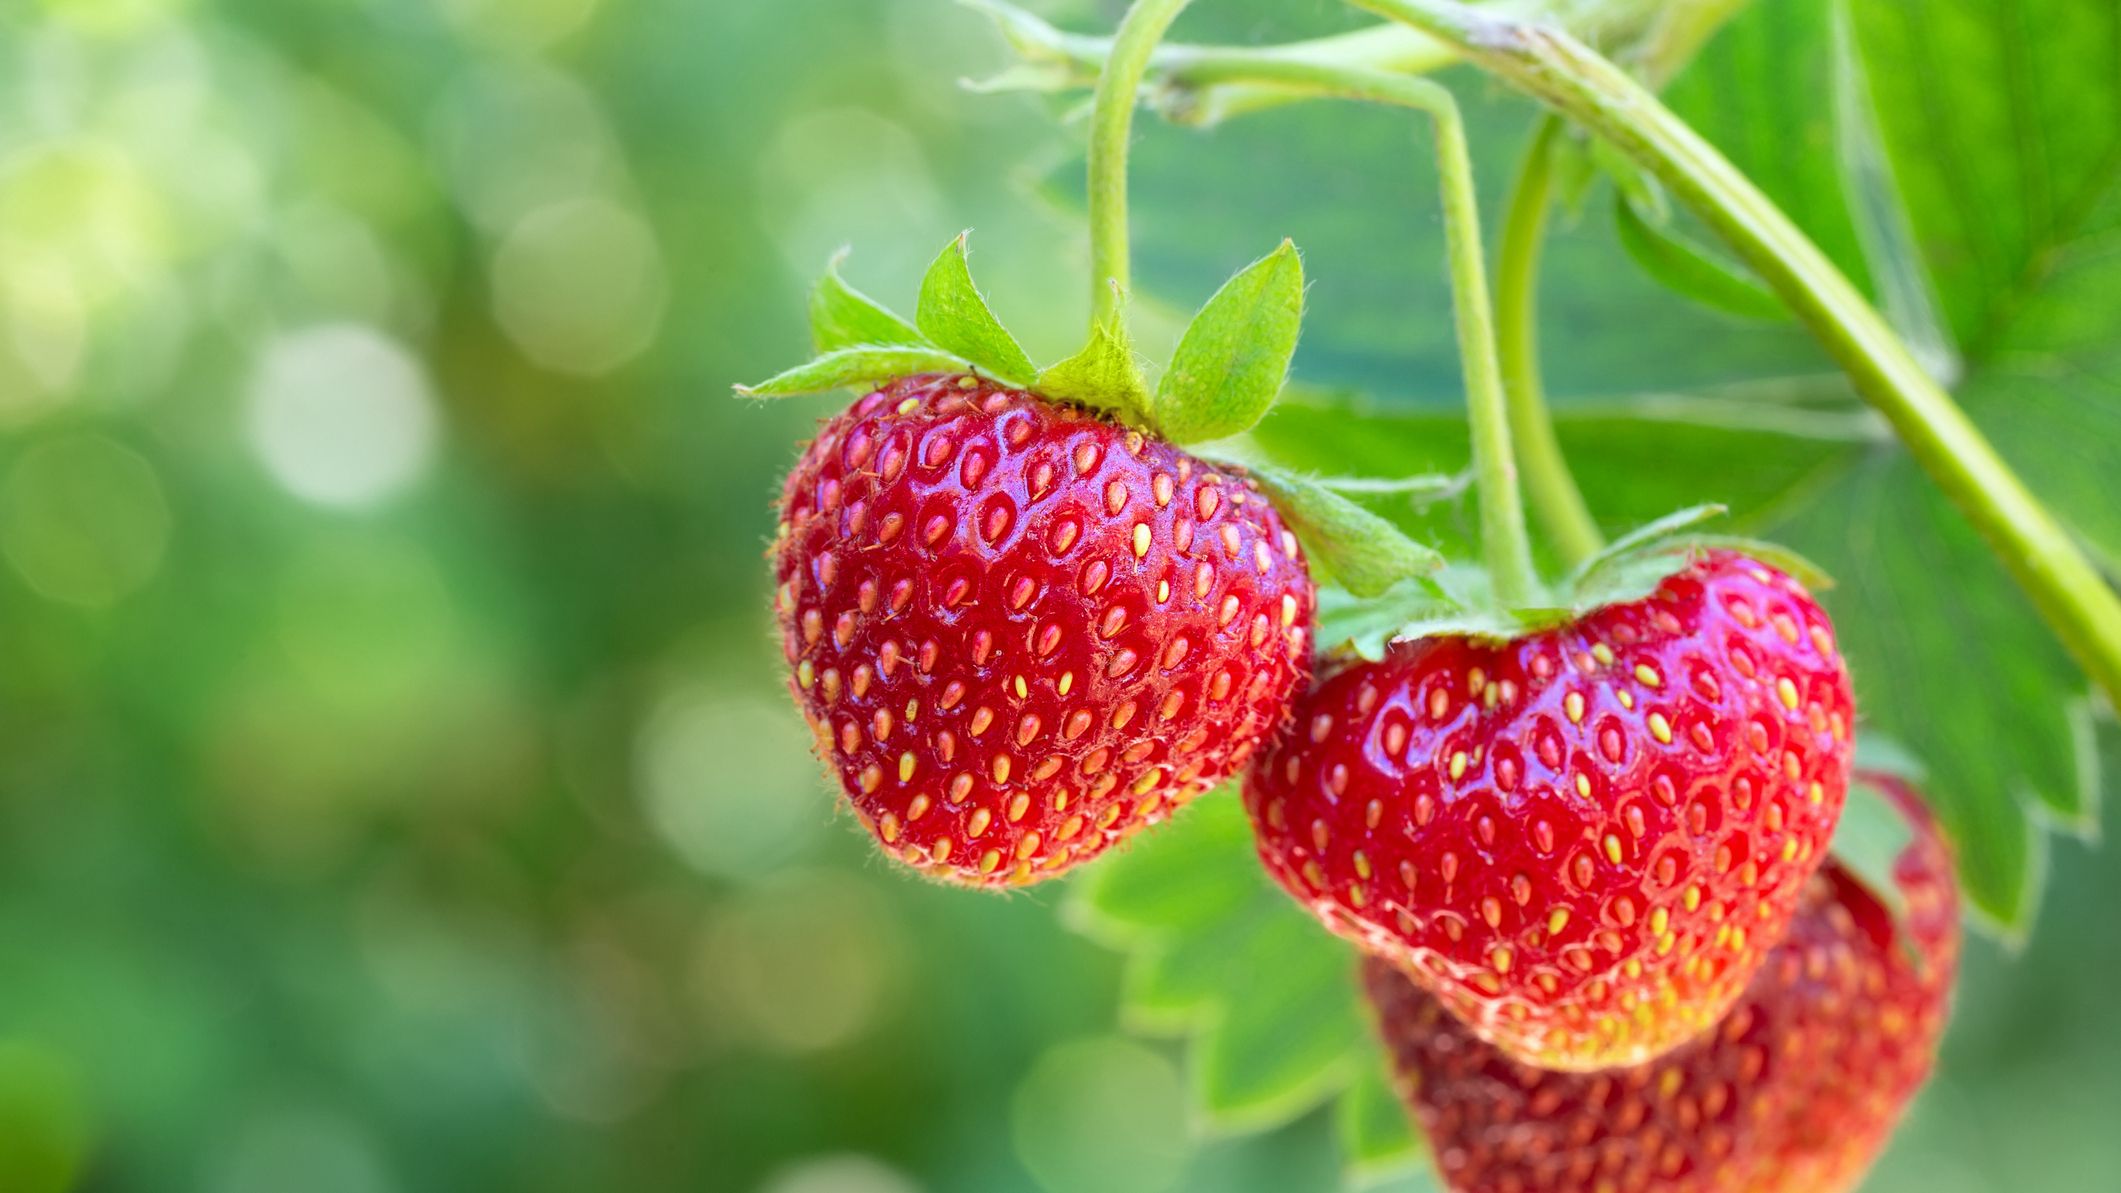 https://hips.hearstapps.com/hmg-prod/images/how-to-grow-strawberries-1675303673.jpg?crop=1xw:0.84375xh;center,top